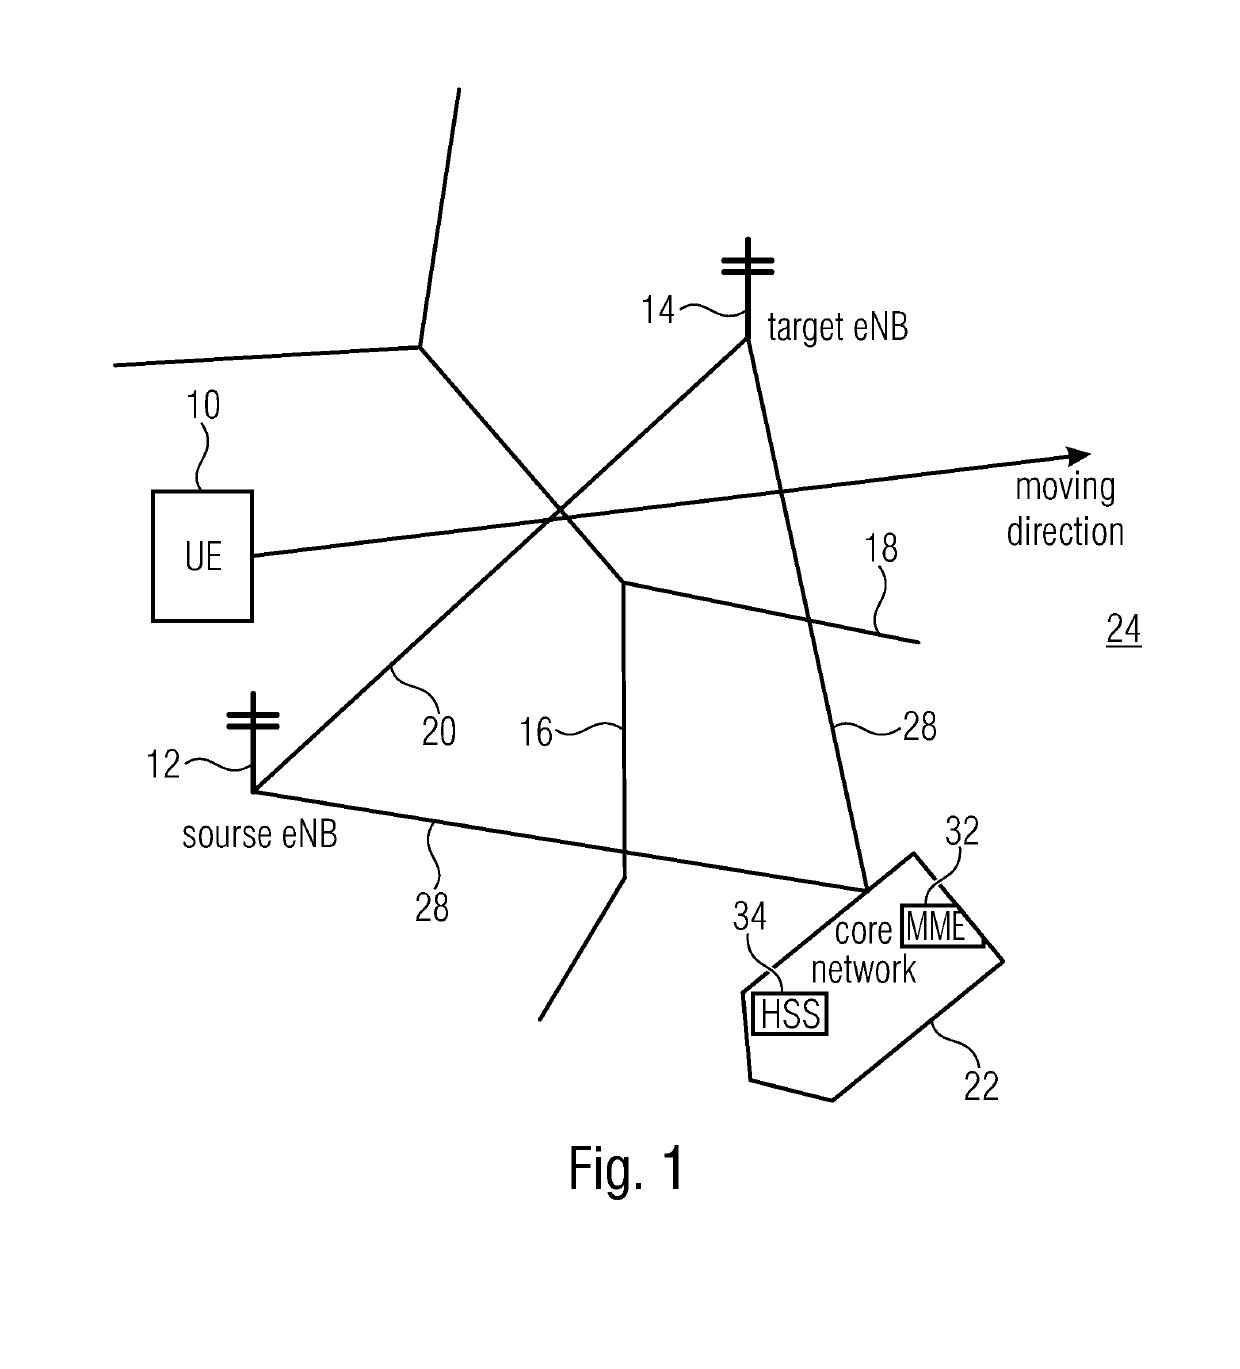 Preemptive Handover Preparation and Tracking/Paging Area Handling and Intelligent Route Selection in a Cellular Network